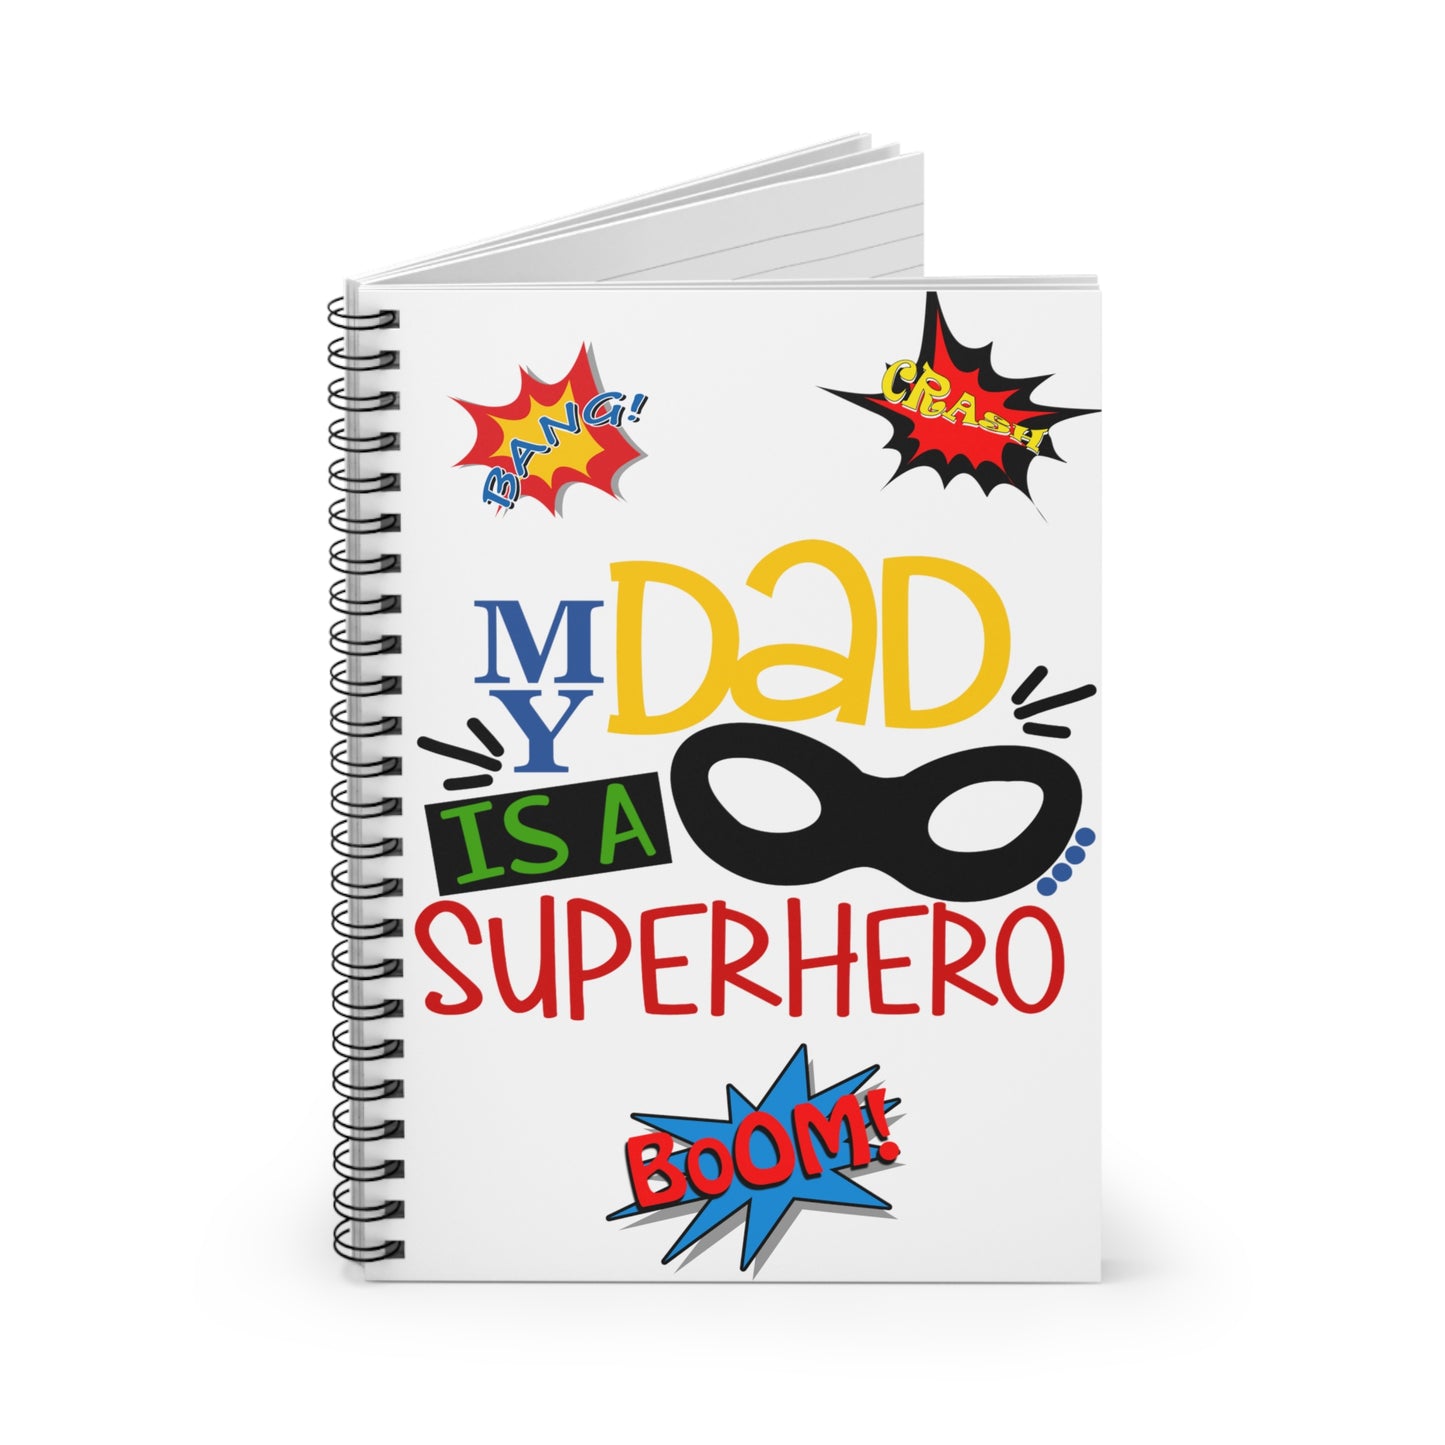 My Dad is a Superhero: Spiral Notebook - Log Books - Journals - Diaries - and More Custom Printed by TheGlassyLass